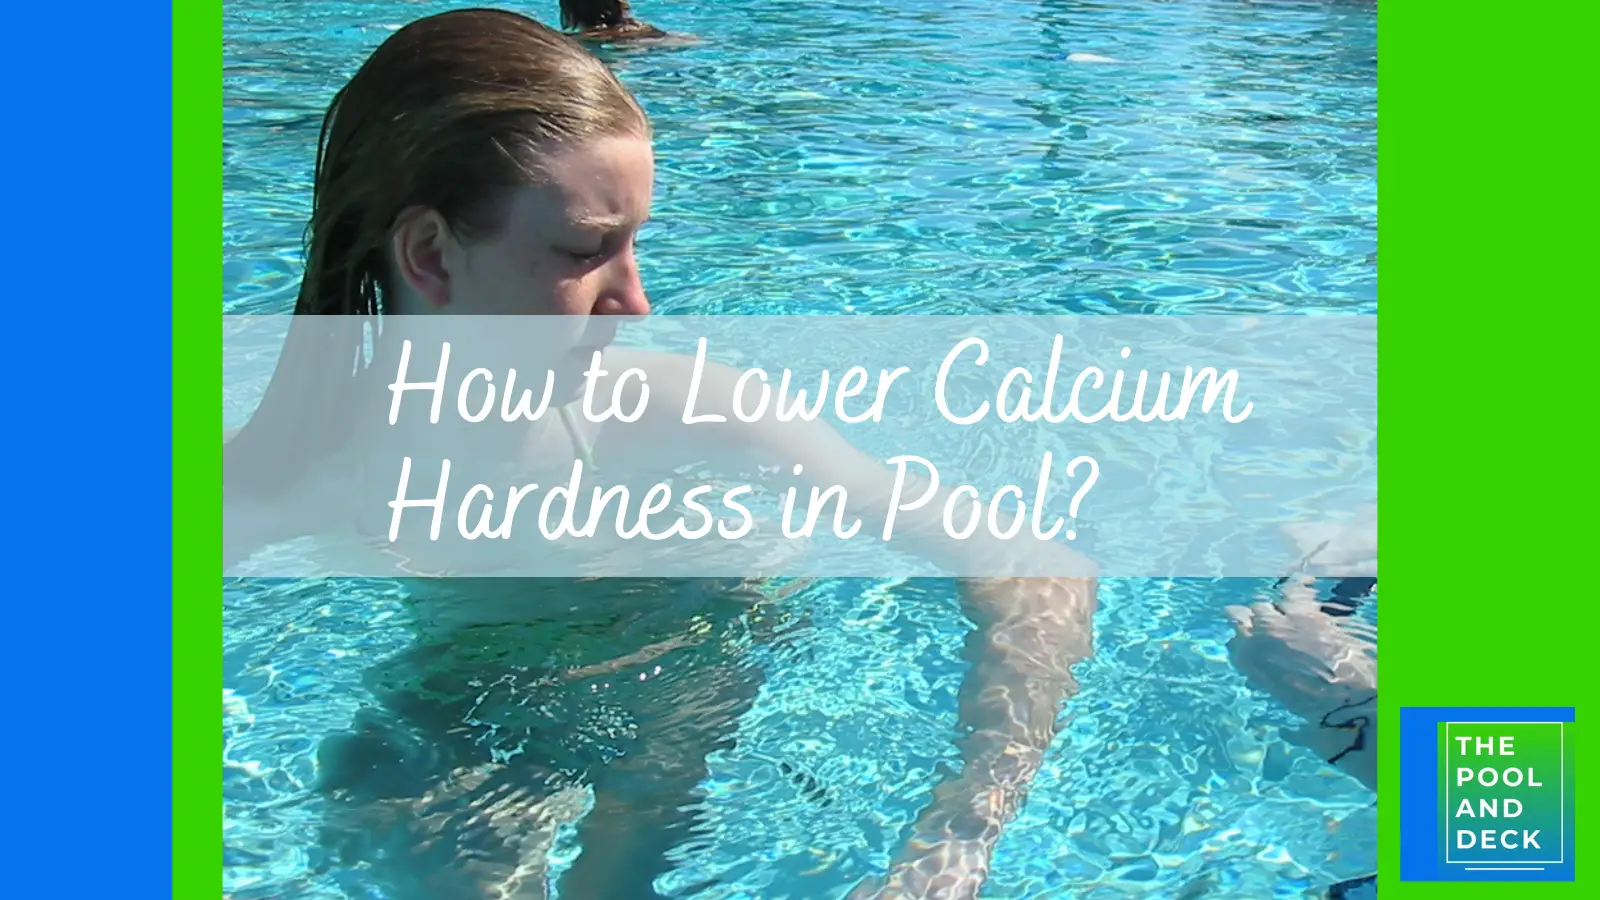 How to Lower Calcium Hardness in Pool? (The Easy Way!)